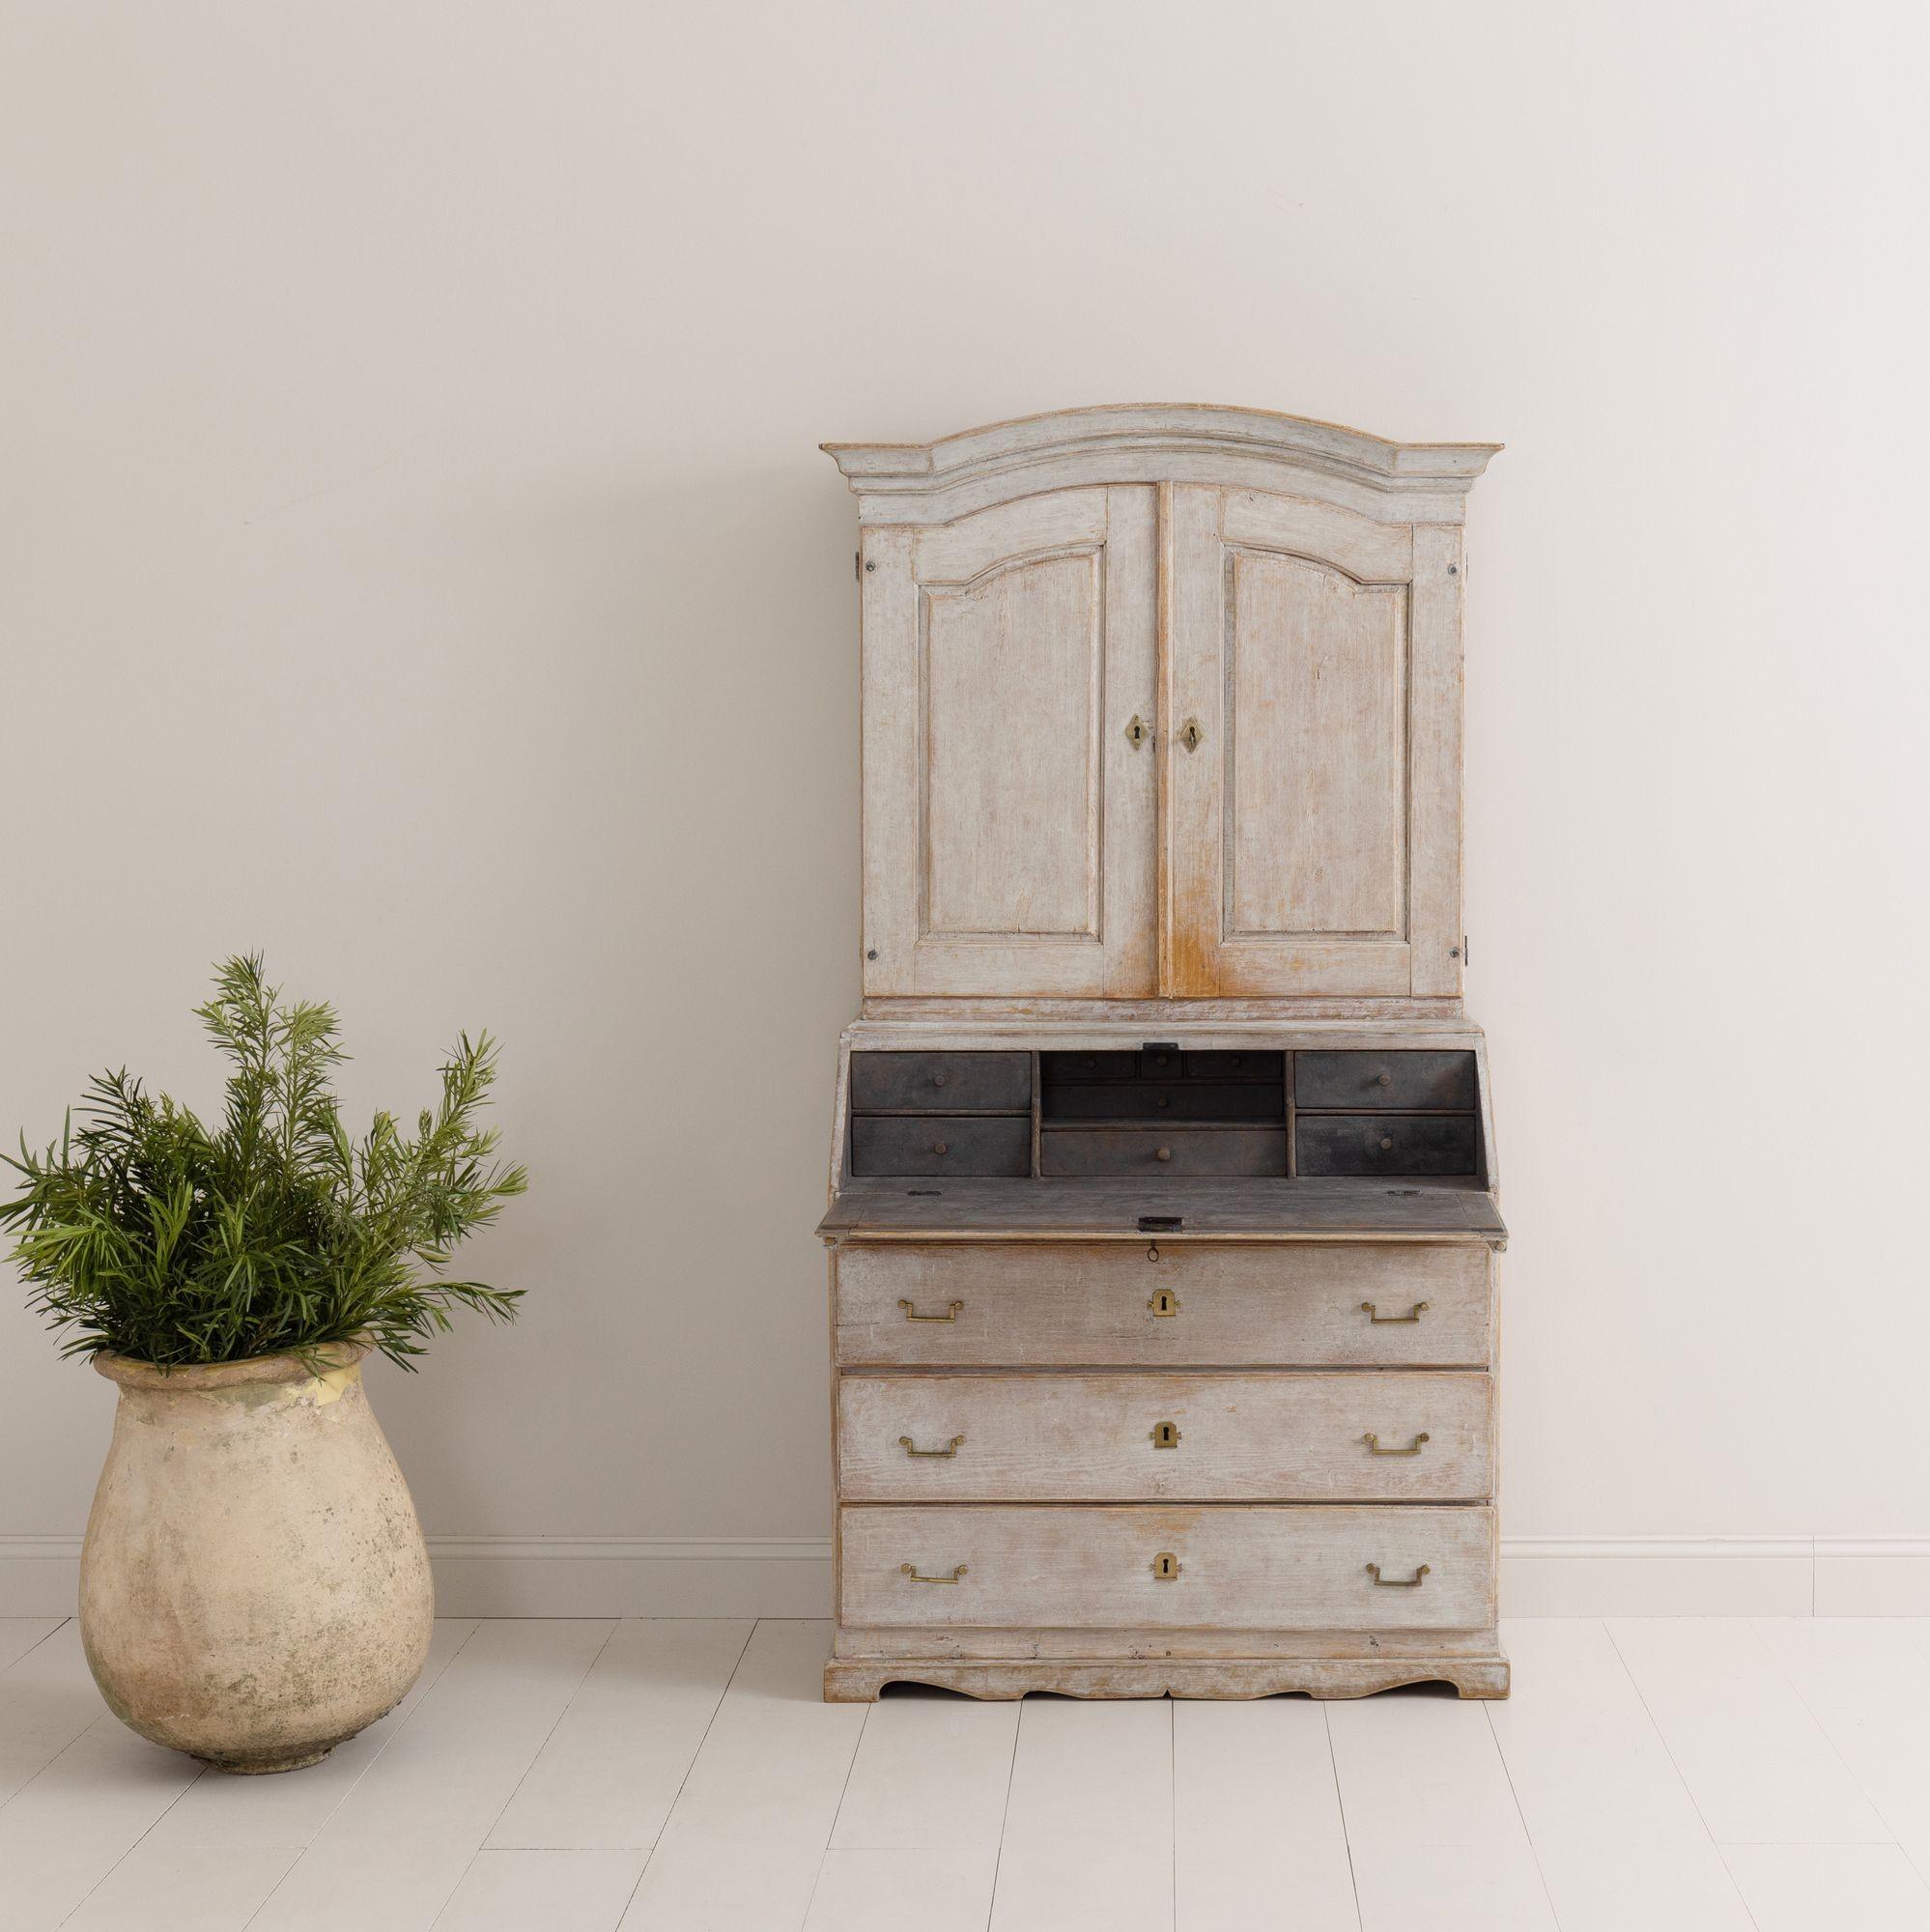 A Swedish early Gustavian period secretary with library from the 18th century with shaped cornice, scalped apron, and original bronze hardware. The upper section has four fixed shelves, the top slotted for utensils. The slant front opens to reveal